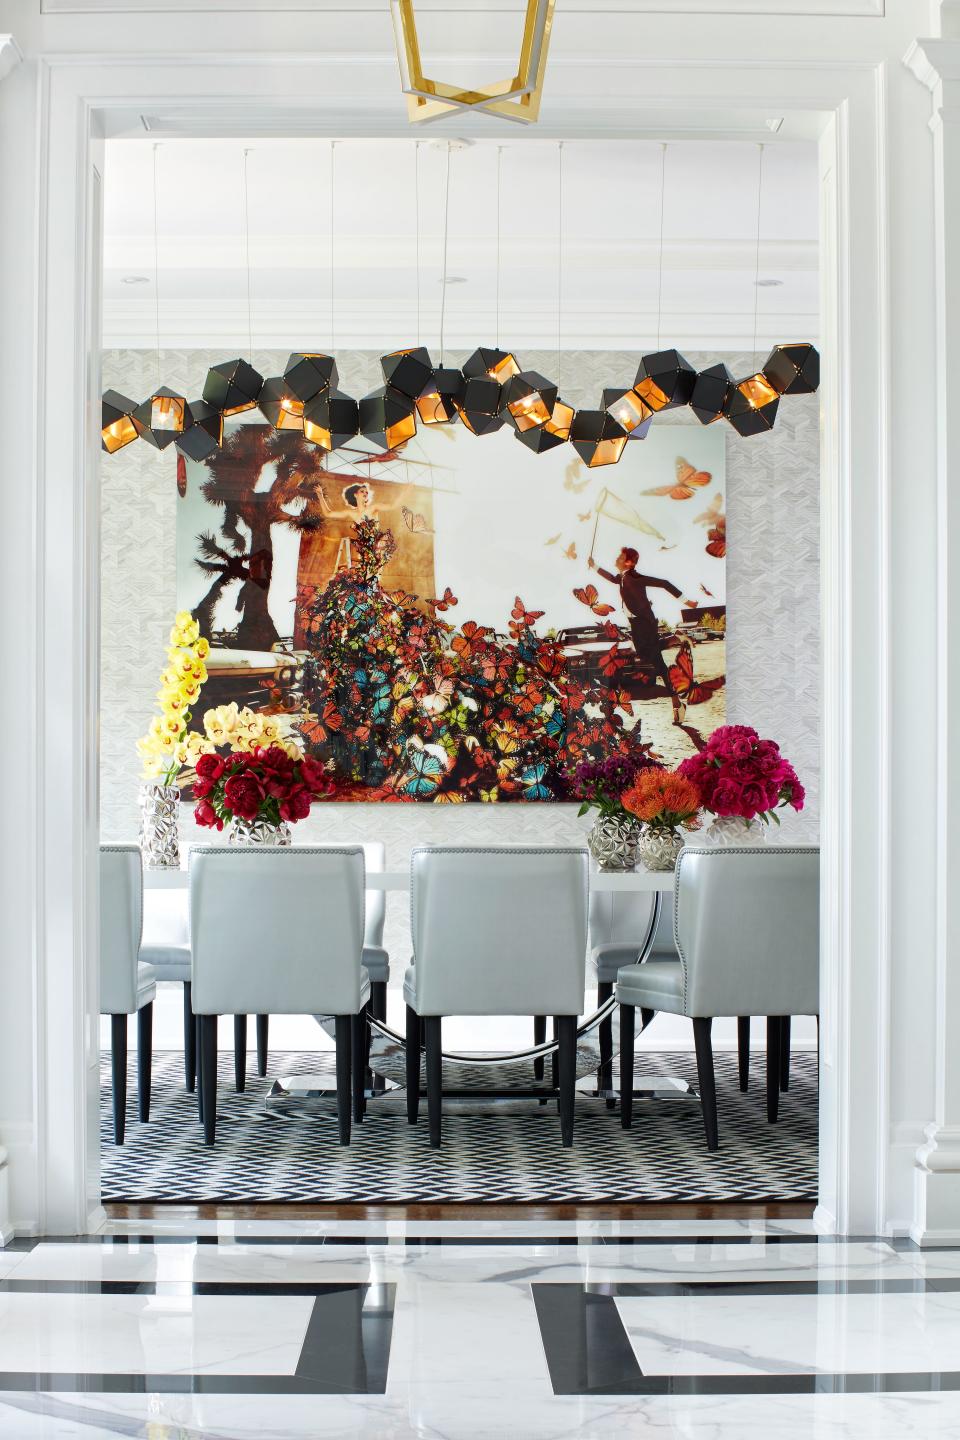 In the dining room, a black steel-and-brass Welles chandelier by Gabriel Scott contrasts boldly with the home’s traditional architecture. Kristian Schuller's Butterfly Catcher takes over the wall, which is covered in grasscloth.